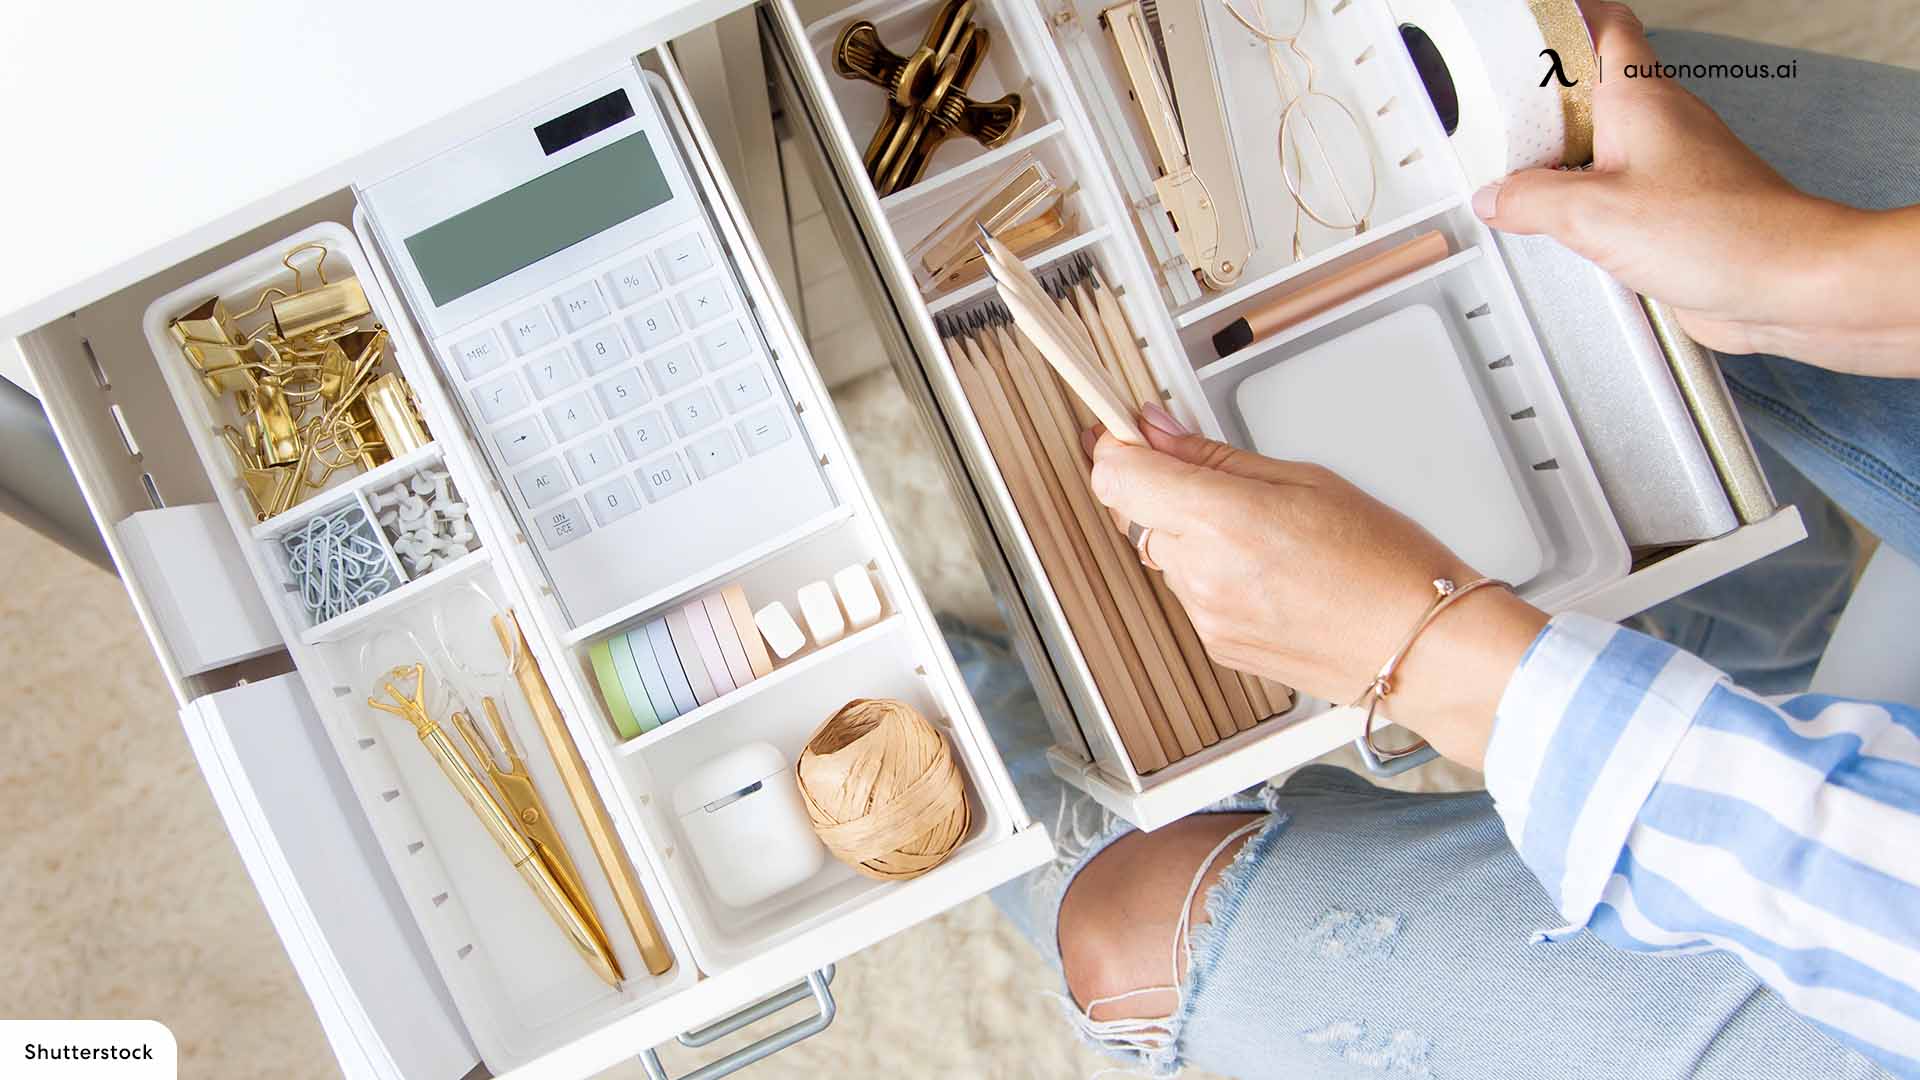 Why Should You Organize Your Desk?